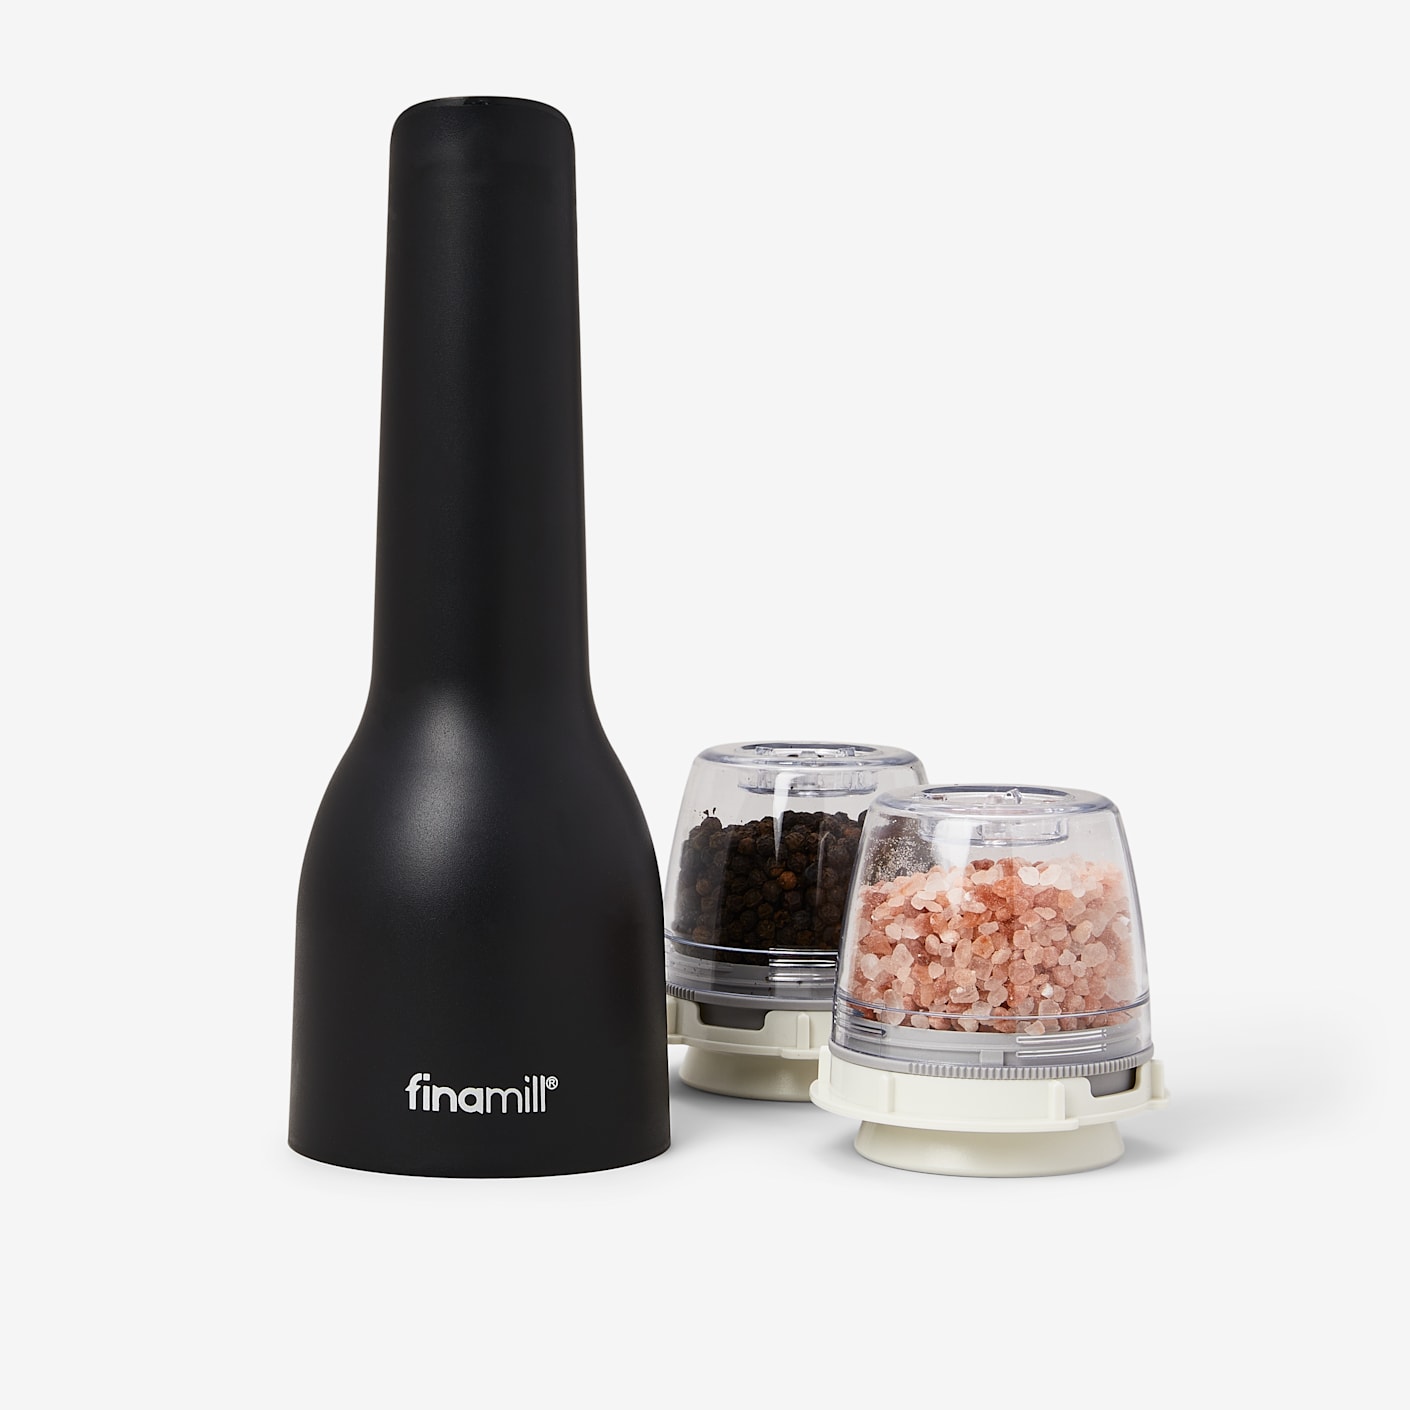 Finamill Finamill Rechargeable Spice Grinder